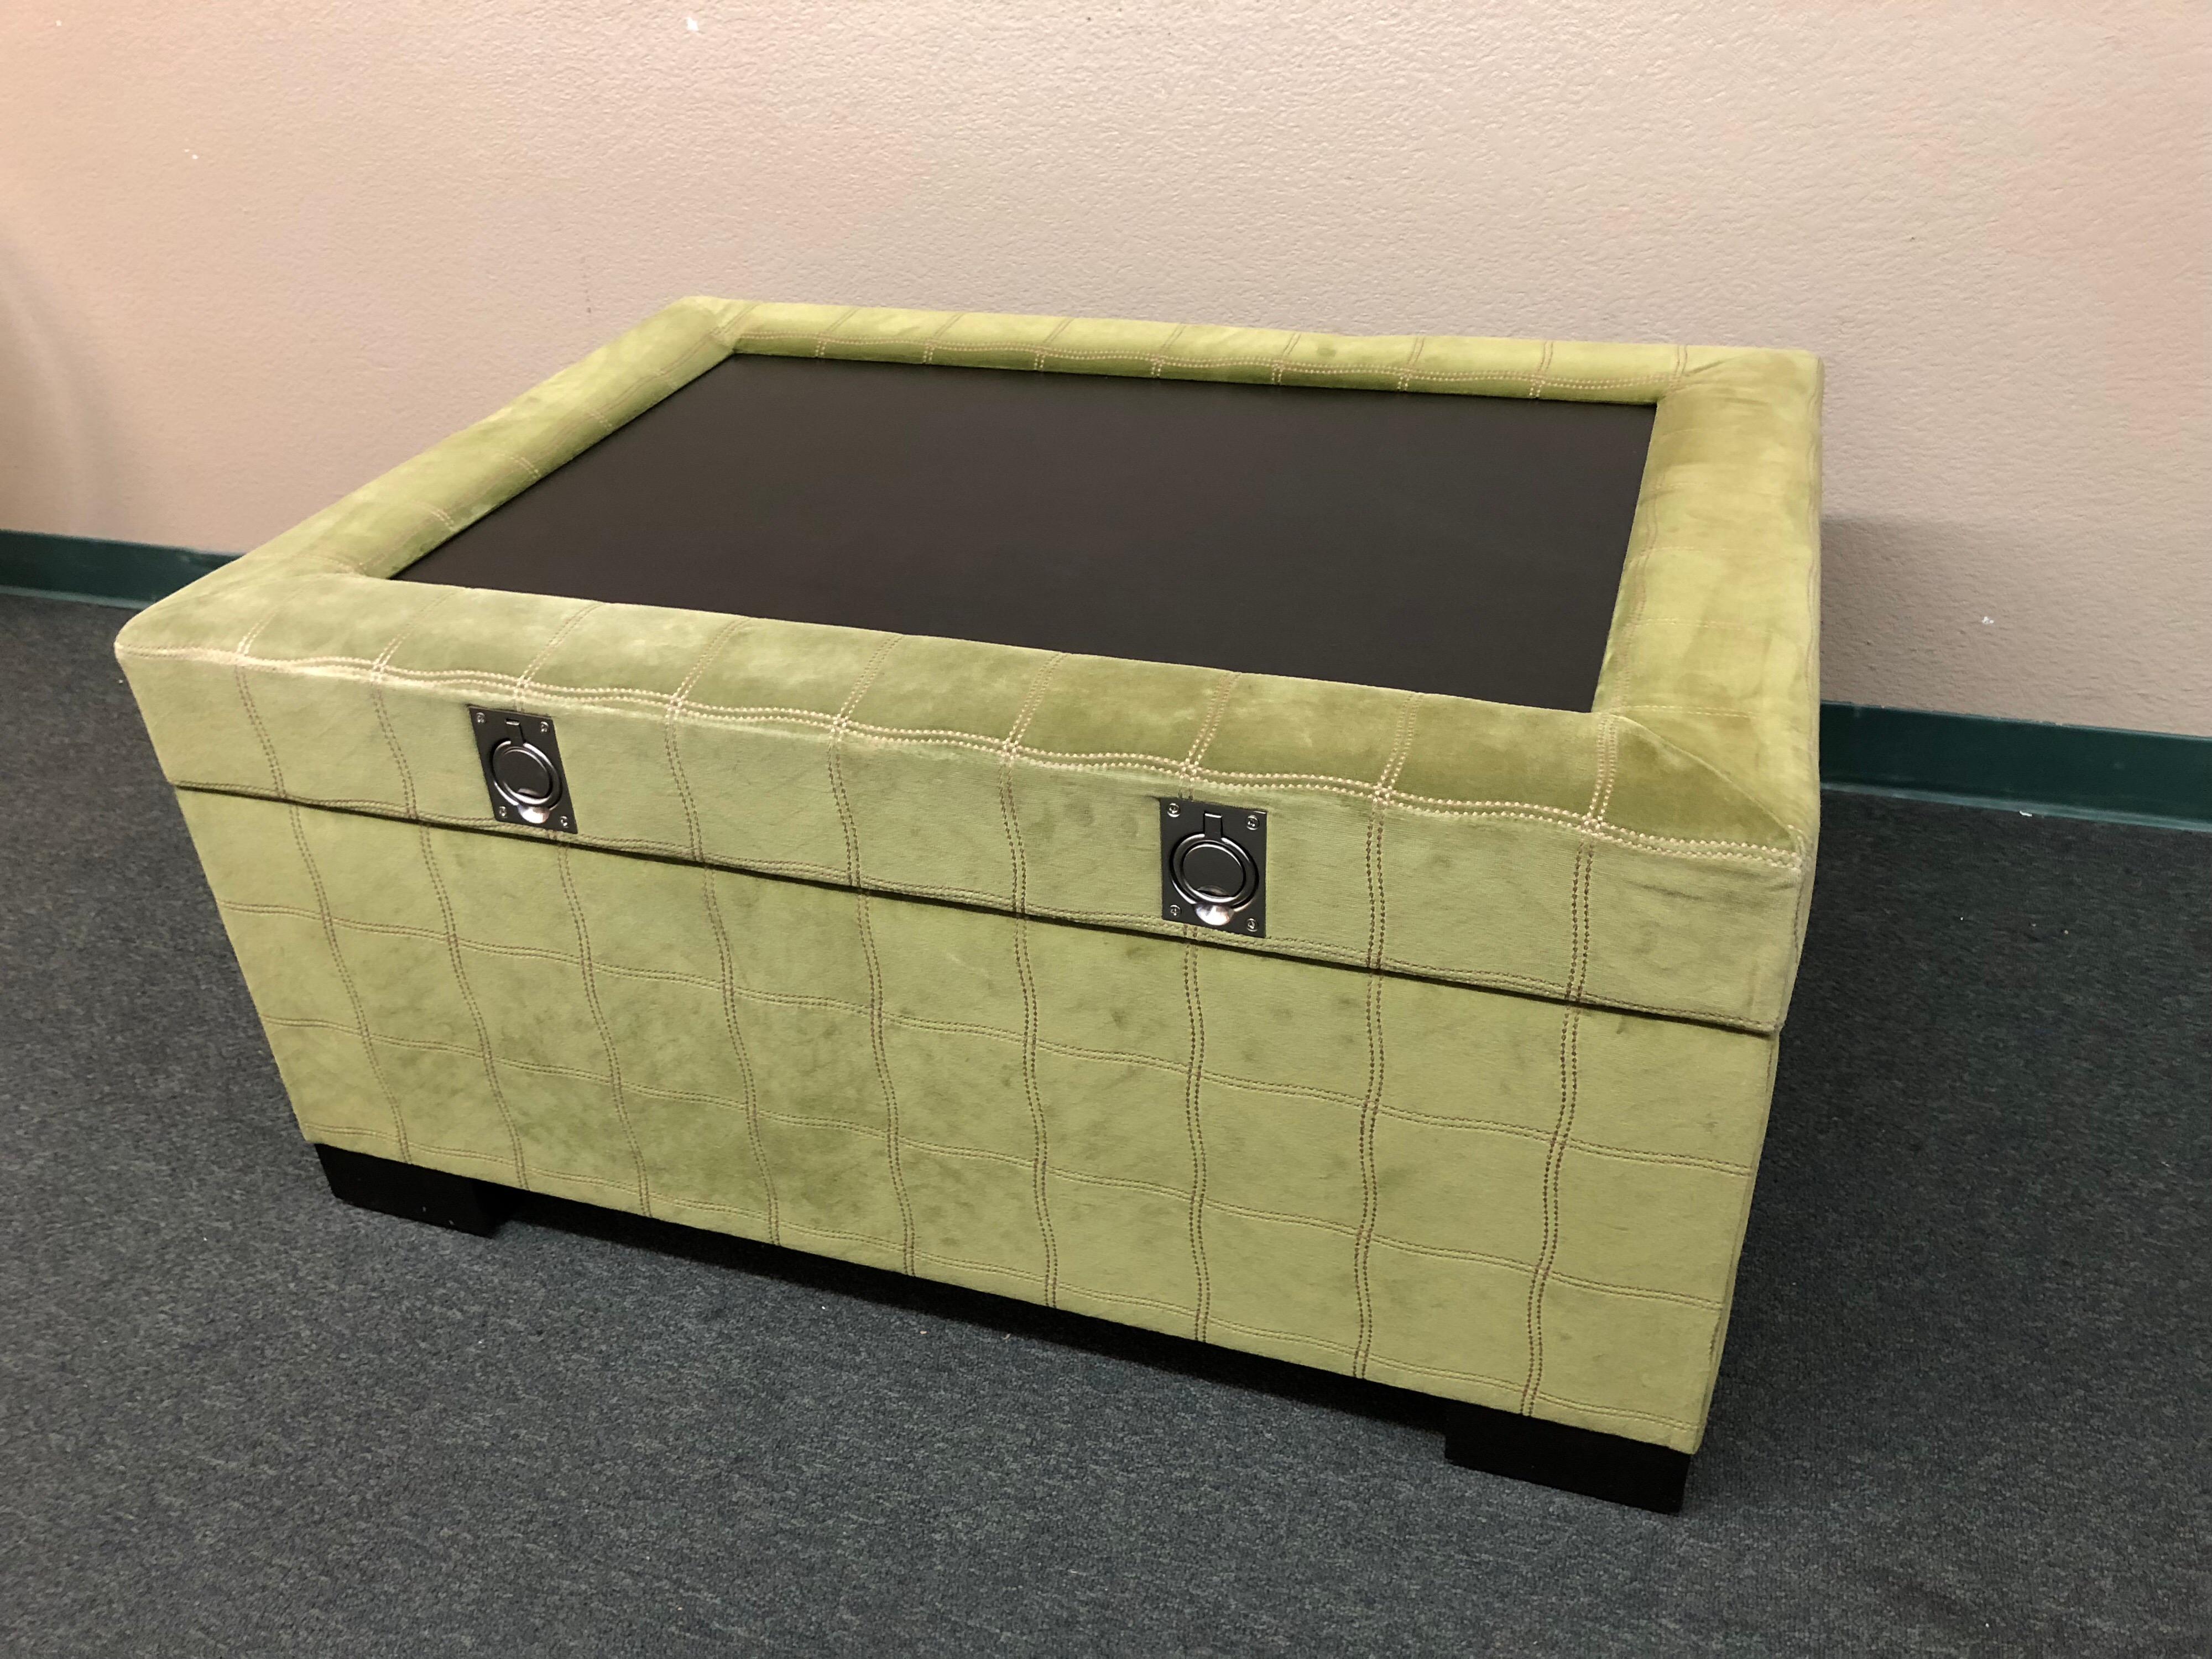 Design Plus Gallery presents an oversized ottoman, upholstered in Osborne & Little velour. Overstitched in a plaid design for a touch of detail, the large piece offers ample storage as well as display or serving area on lid. Brushed stainless